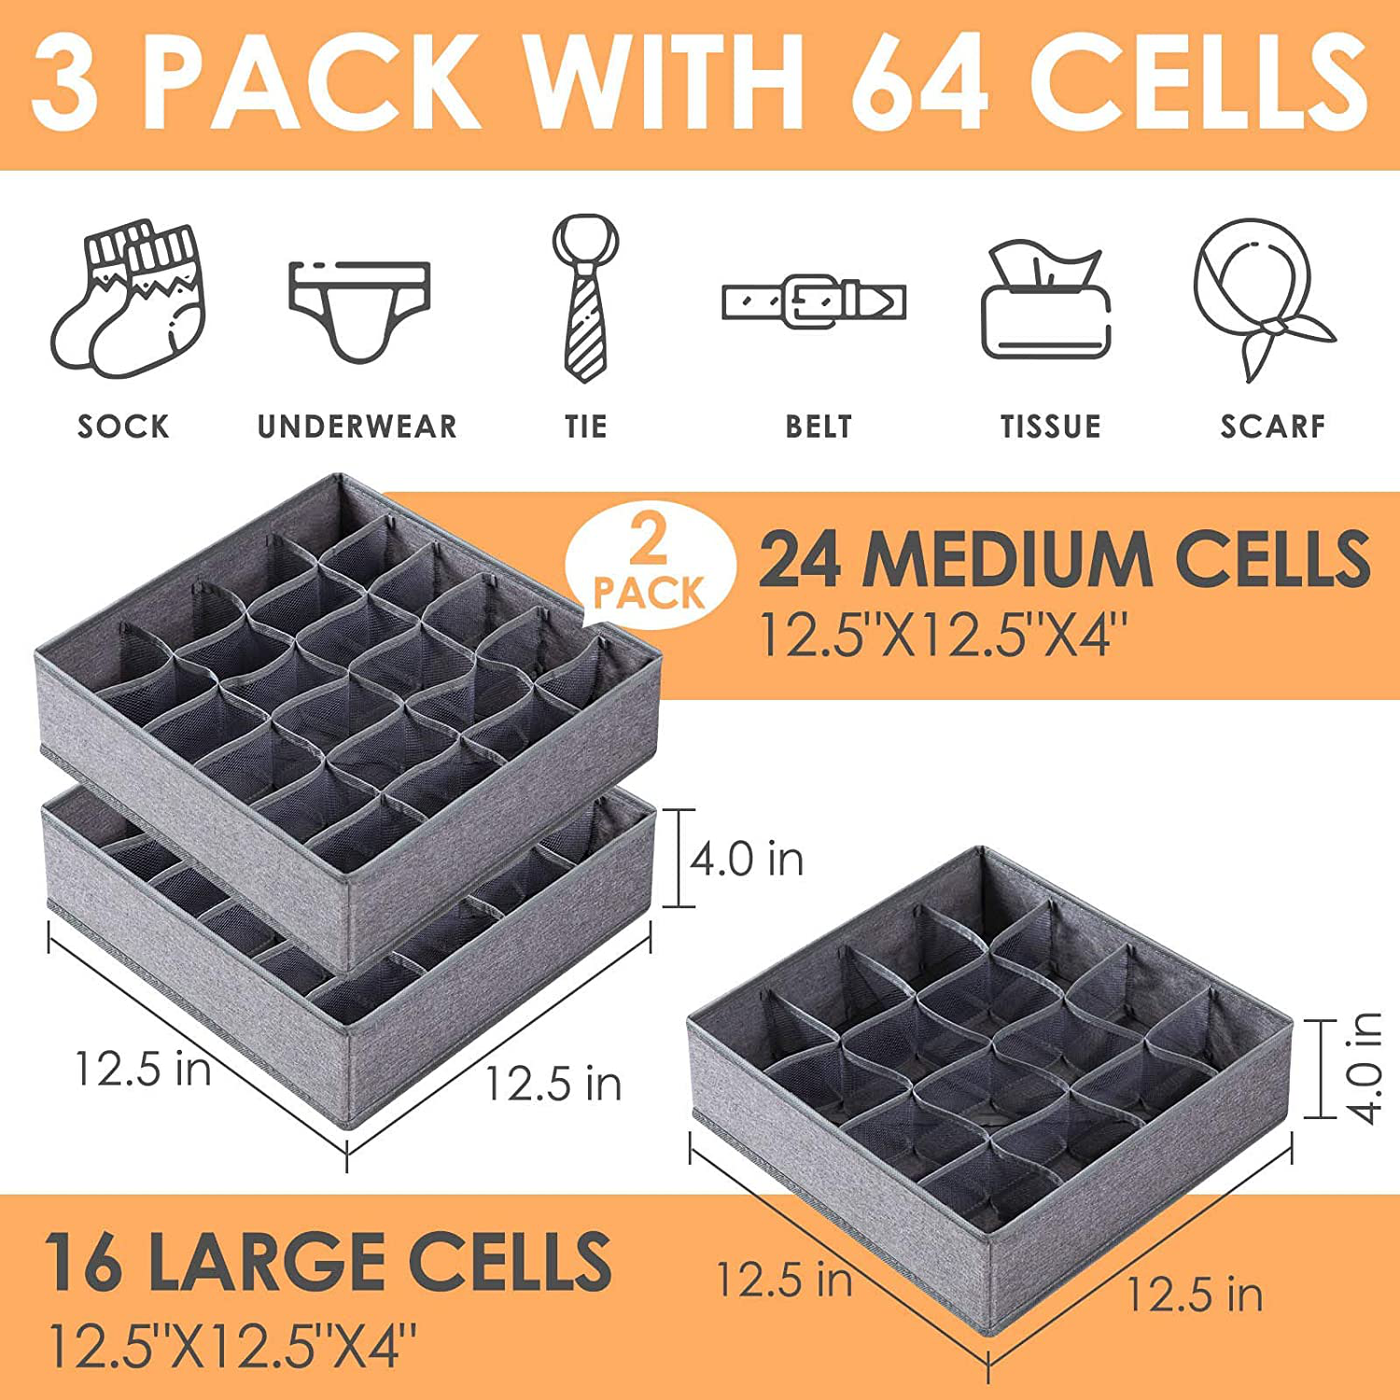 3 Pack Sock Underwear Organizer Dividers, 64 Cell Fabric Foldable Cabinet Closet Organizers and Storage Boxes for Storing Socks, Underwear, Ties (16+24+24 Cell, Beige)